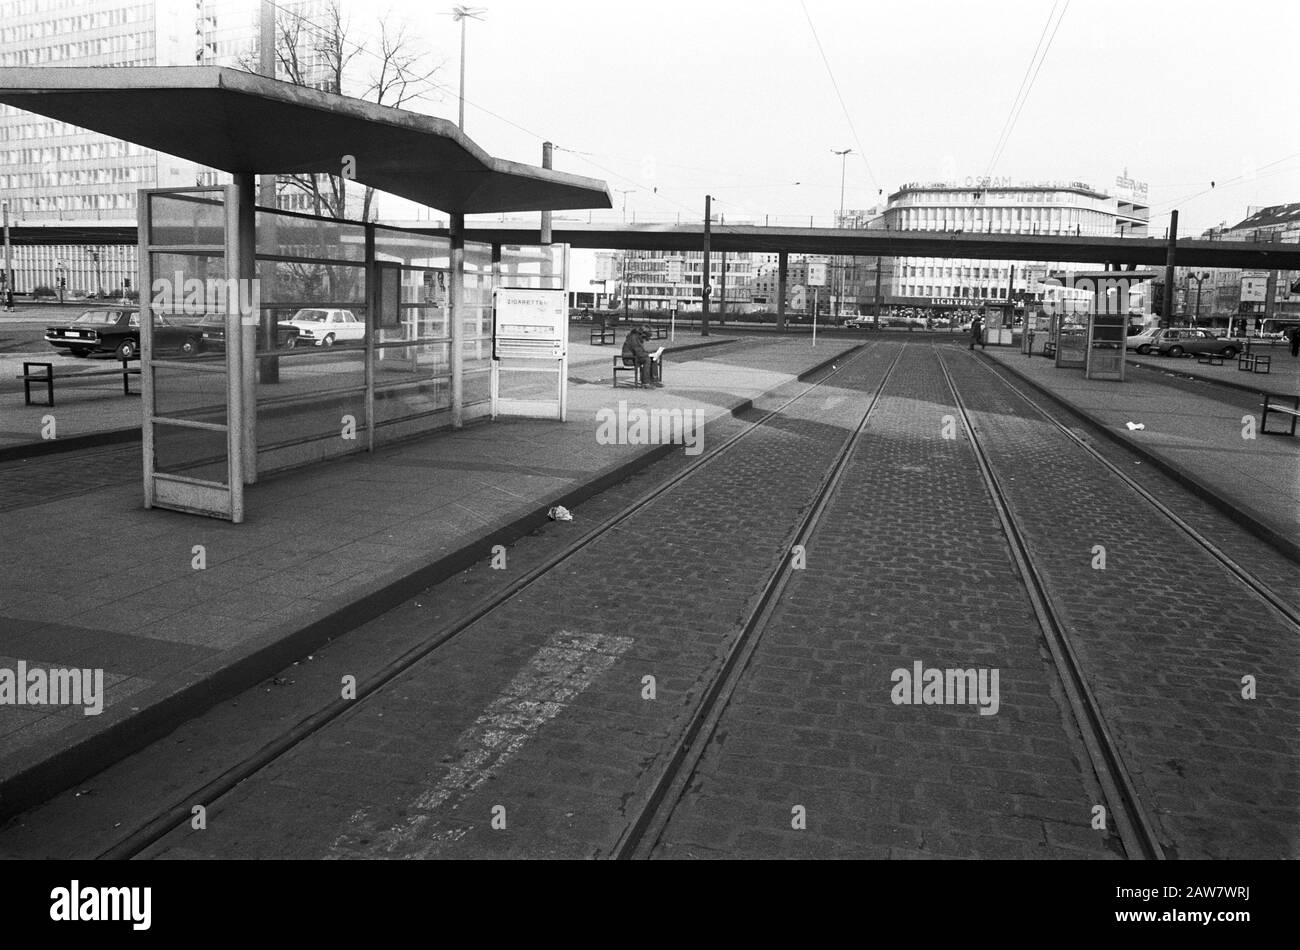 Strike in West Germany mainly transport personnel  Empty tram Date: February 12, 1974 Location: Dusseldorf, West Germany Keywords: strikes Stock Photo